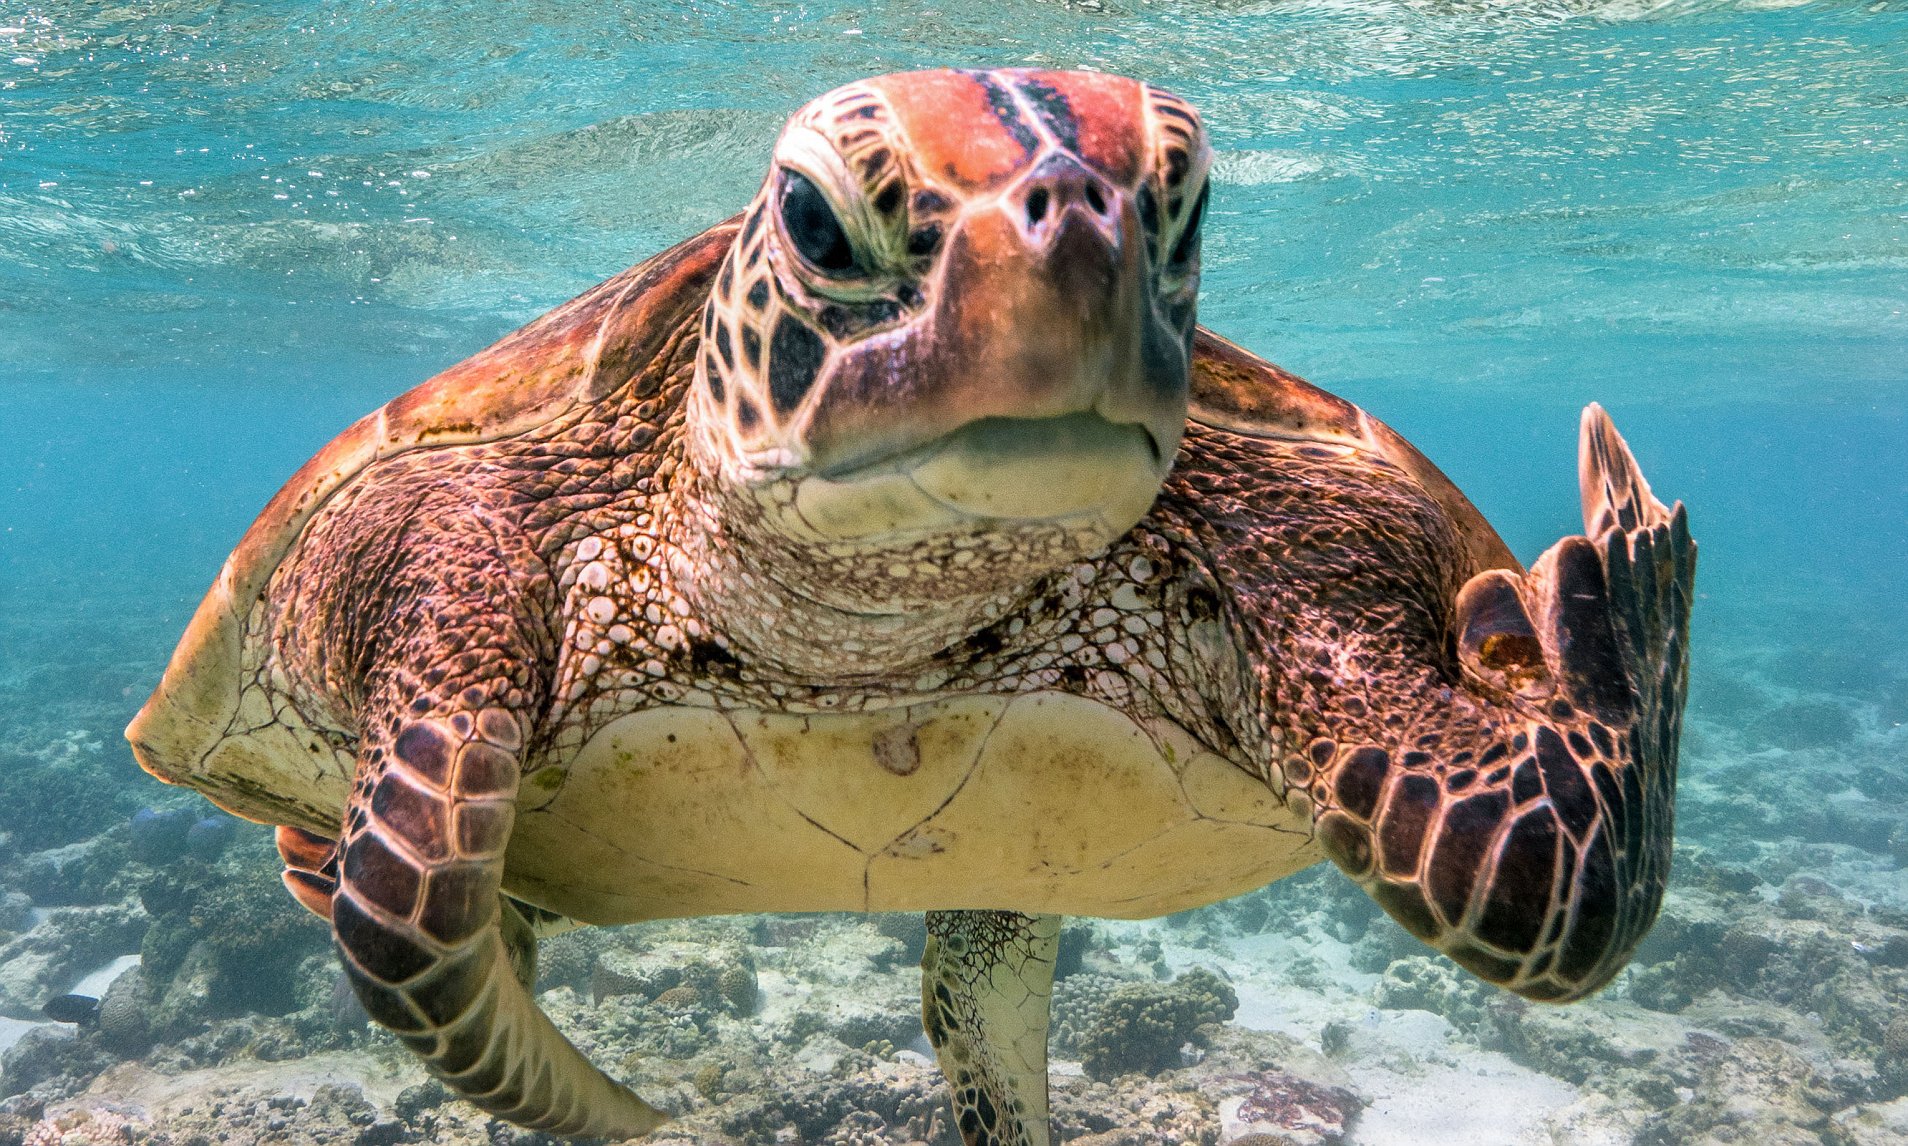 Turtles DON'T live inside their shells as shocking reality